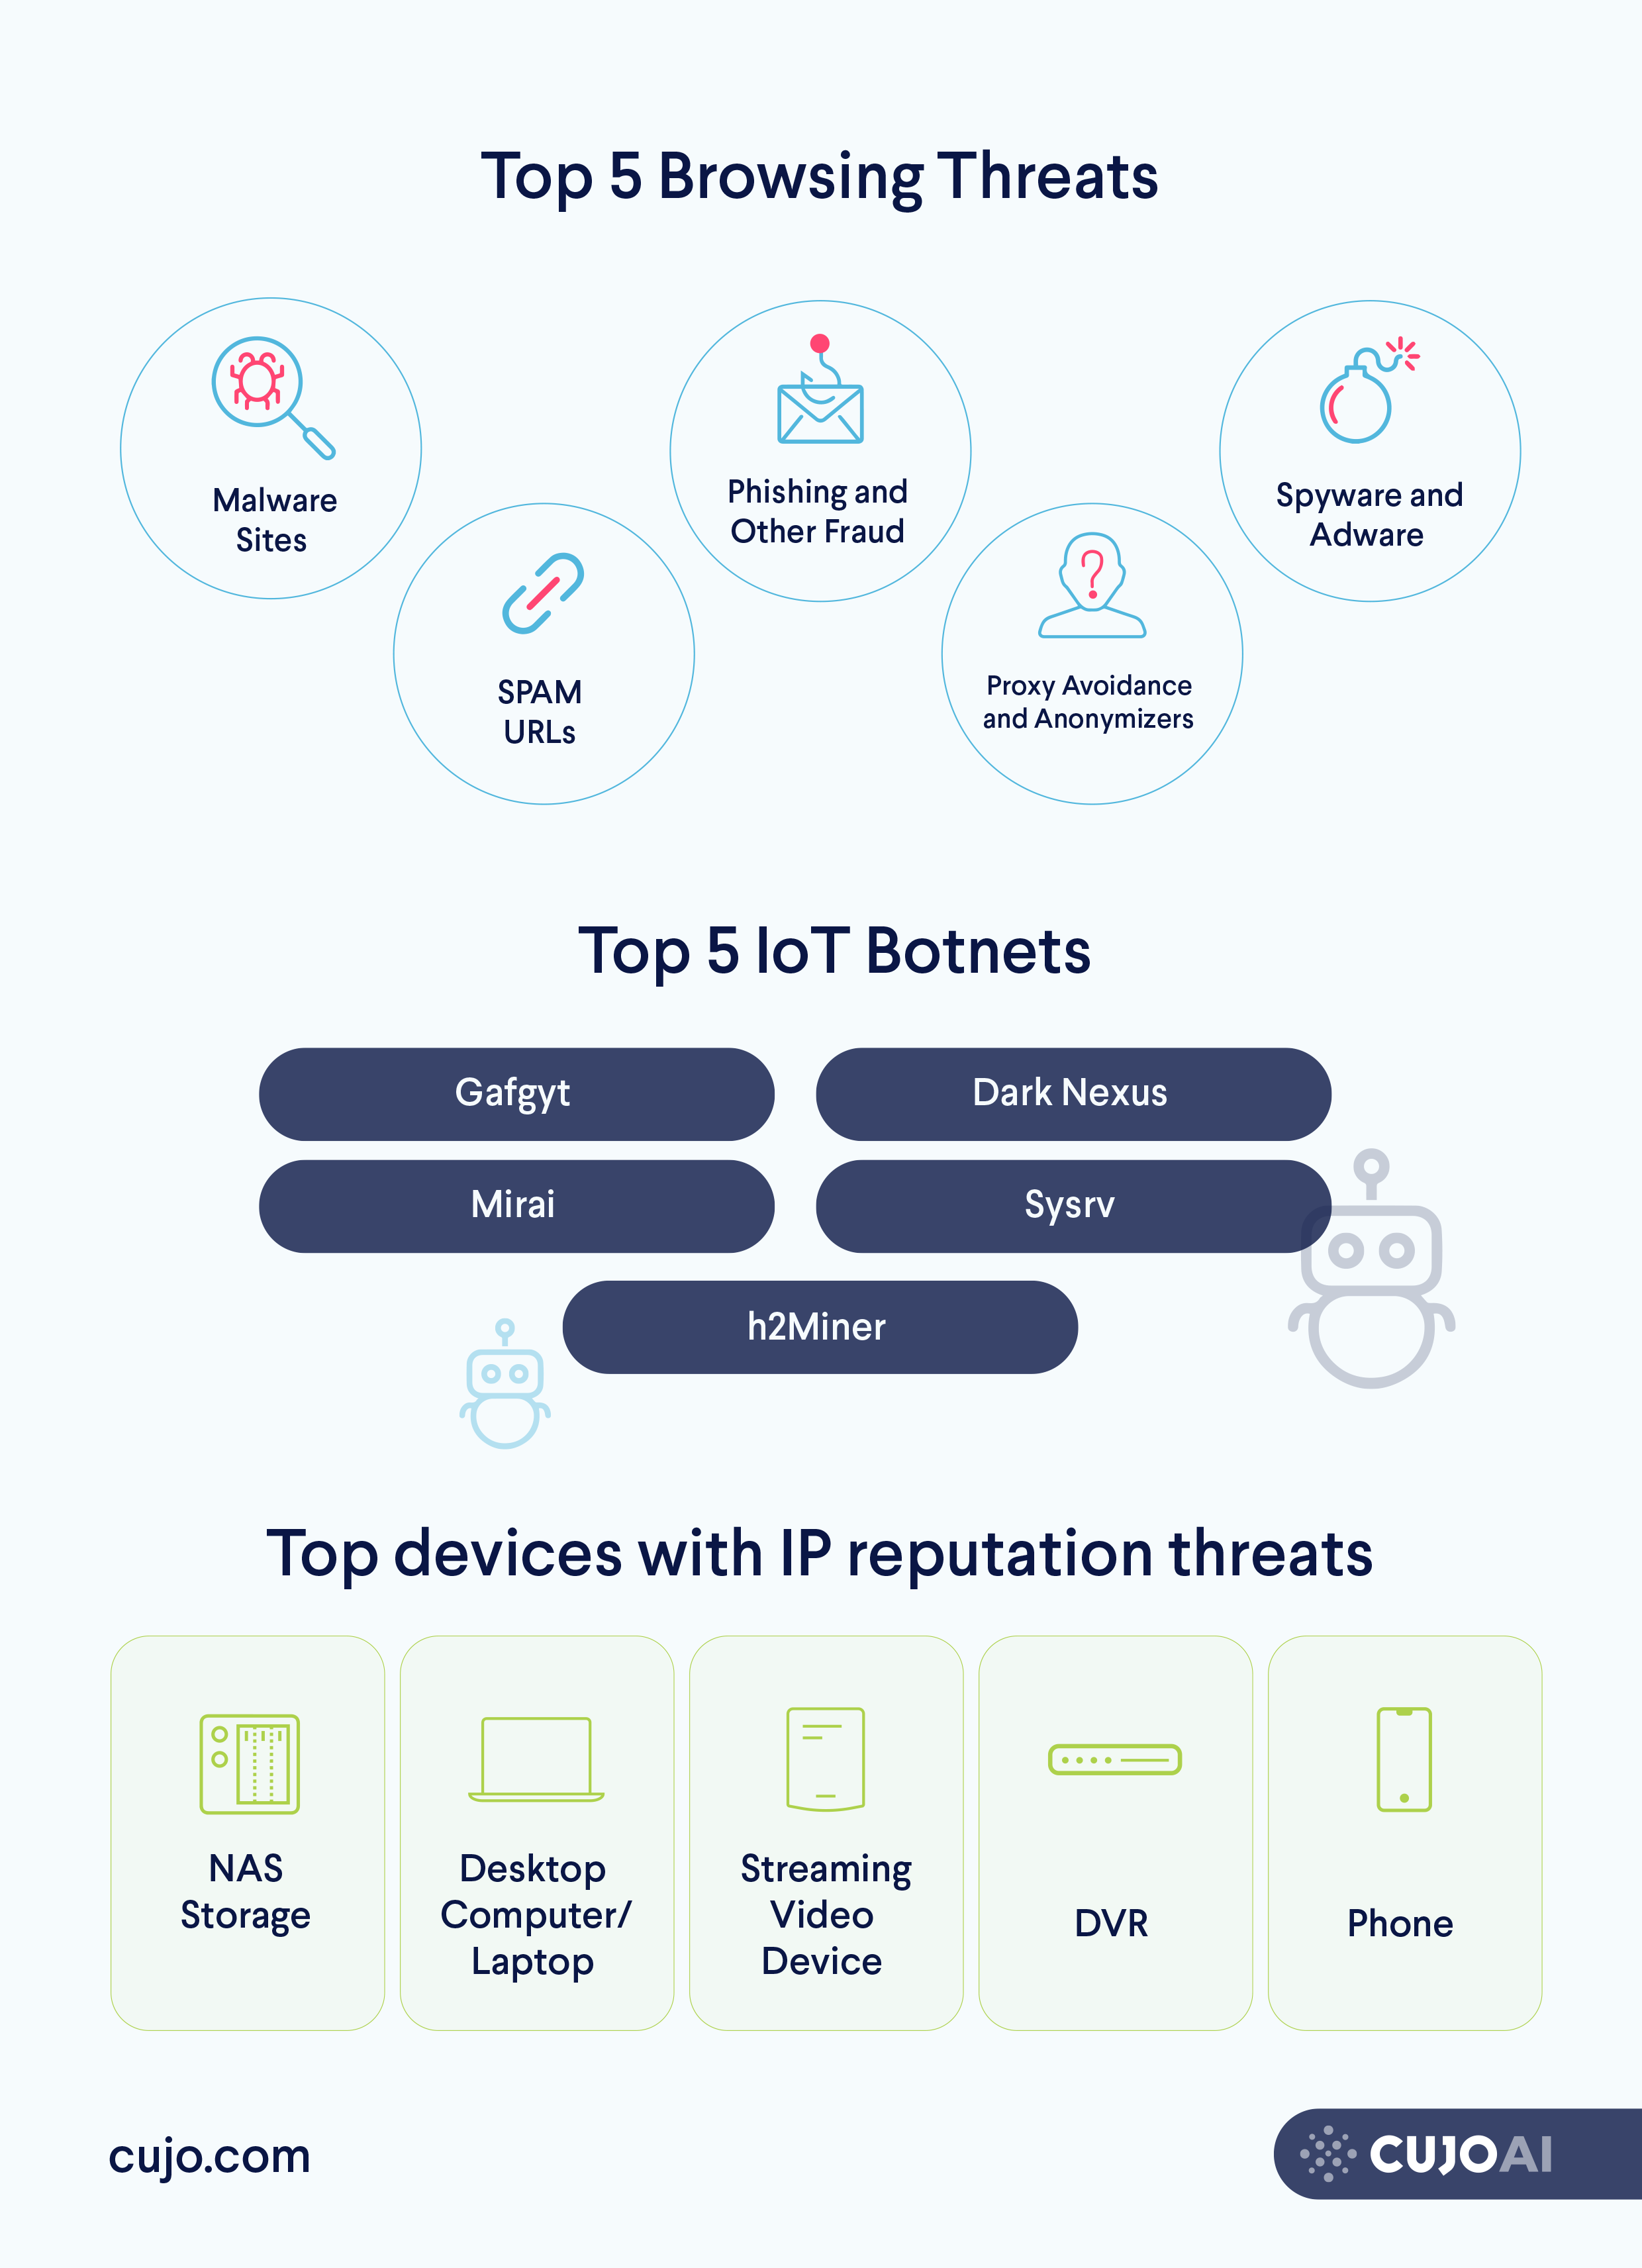 Infograph shows top browsing and IoT security threats in June, 2021: spam, malicious websites, adware, and other. Also shows top 5 vulnerable IoT devices that are targets of disreputable IP addresses. Data from CUJO AI Labs